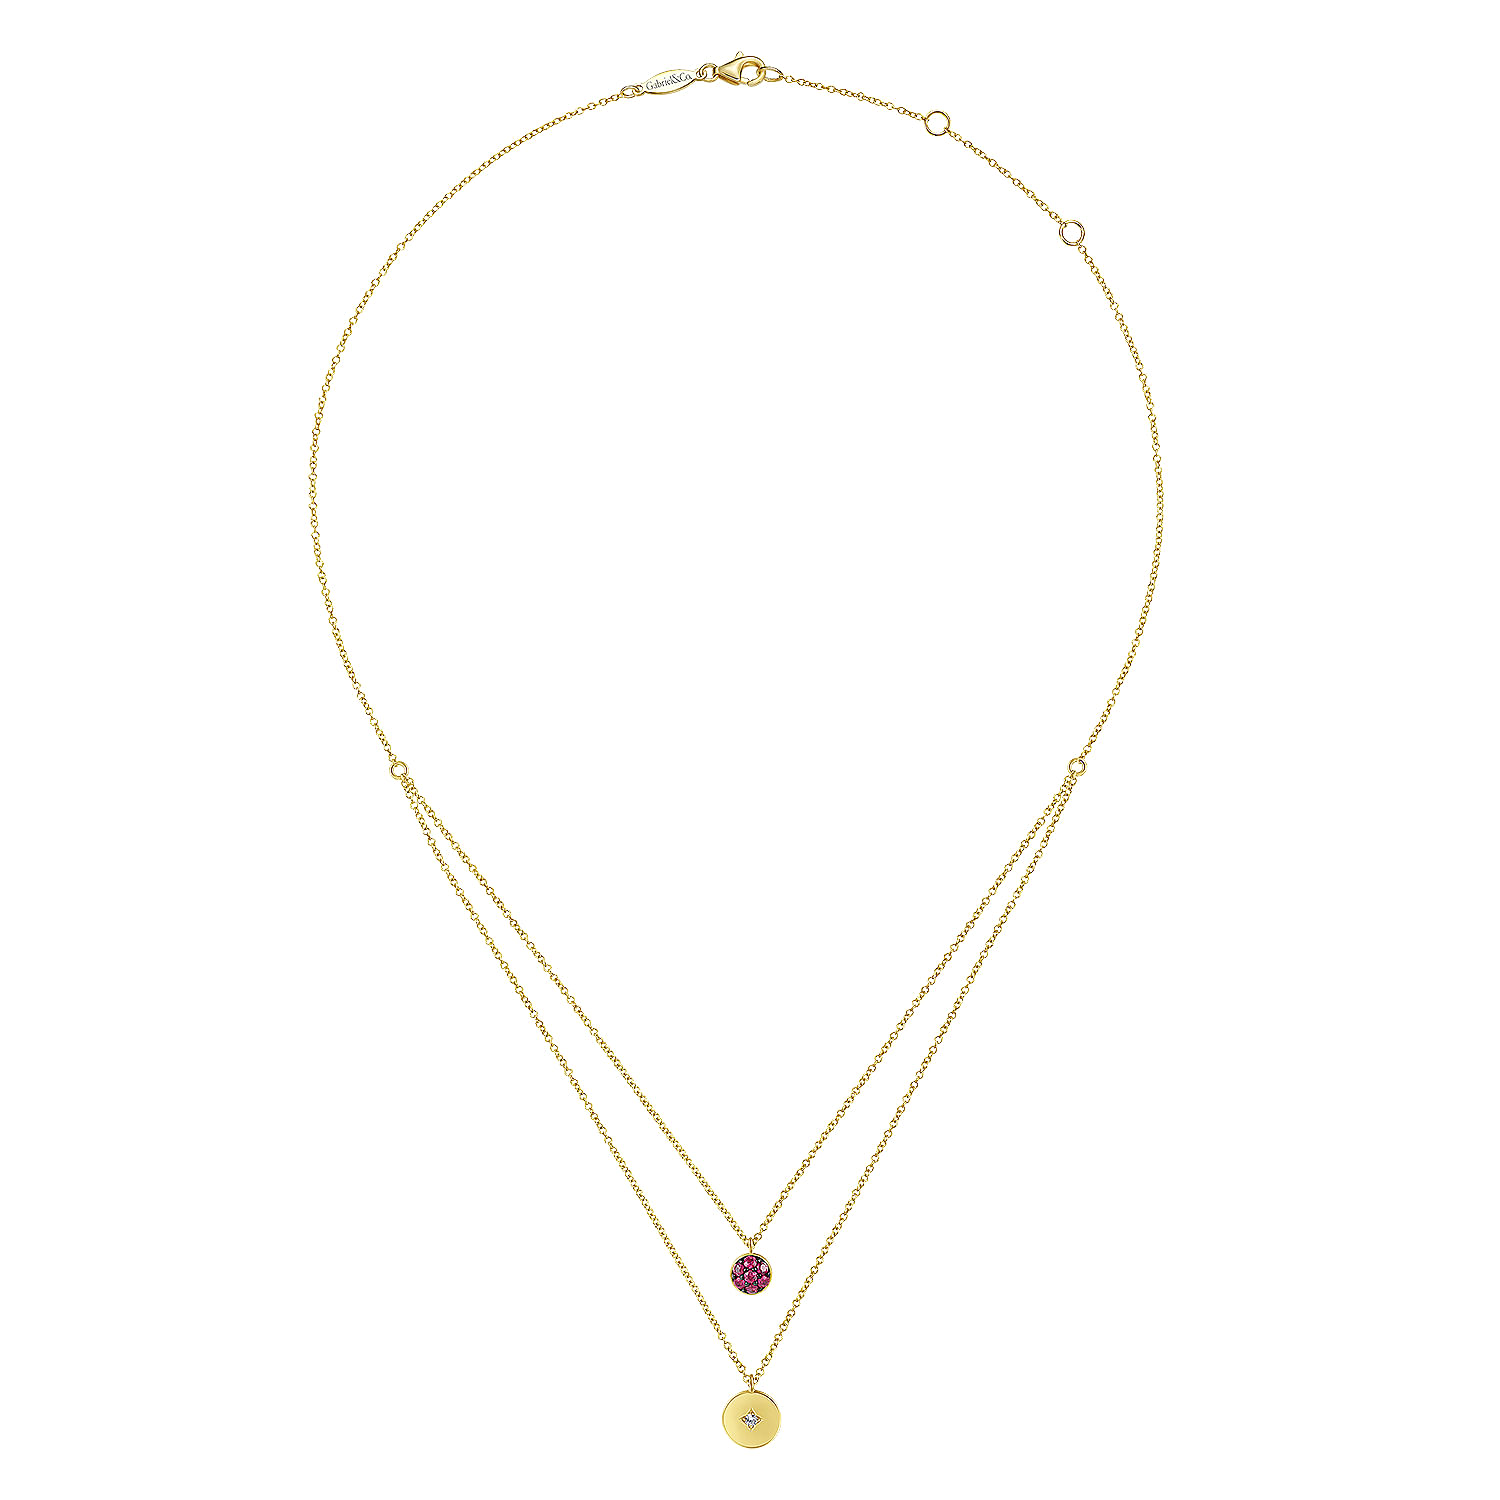 14K Yellow Gold Round Ruby Pavé and Diamond Disc Necklace